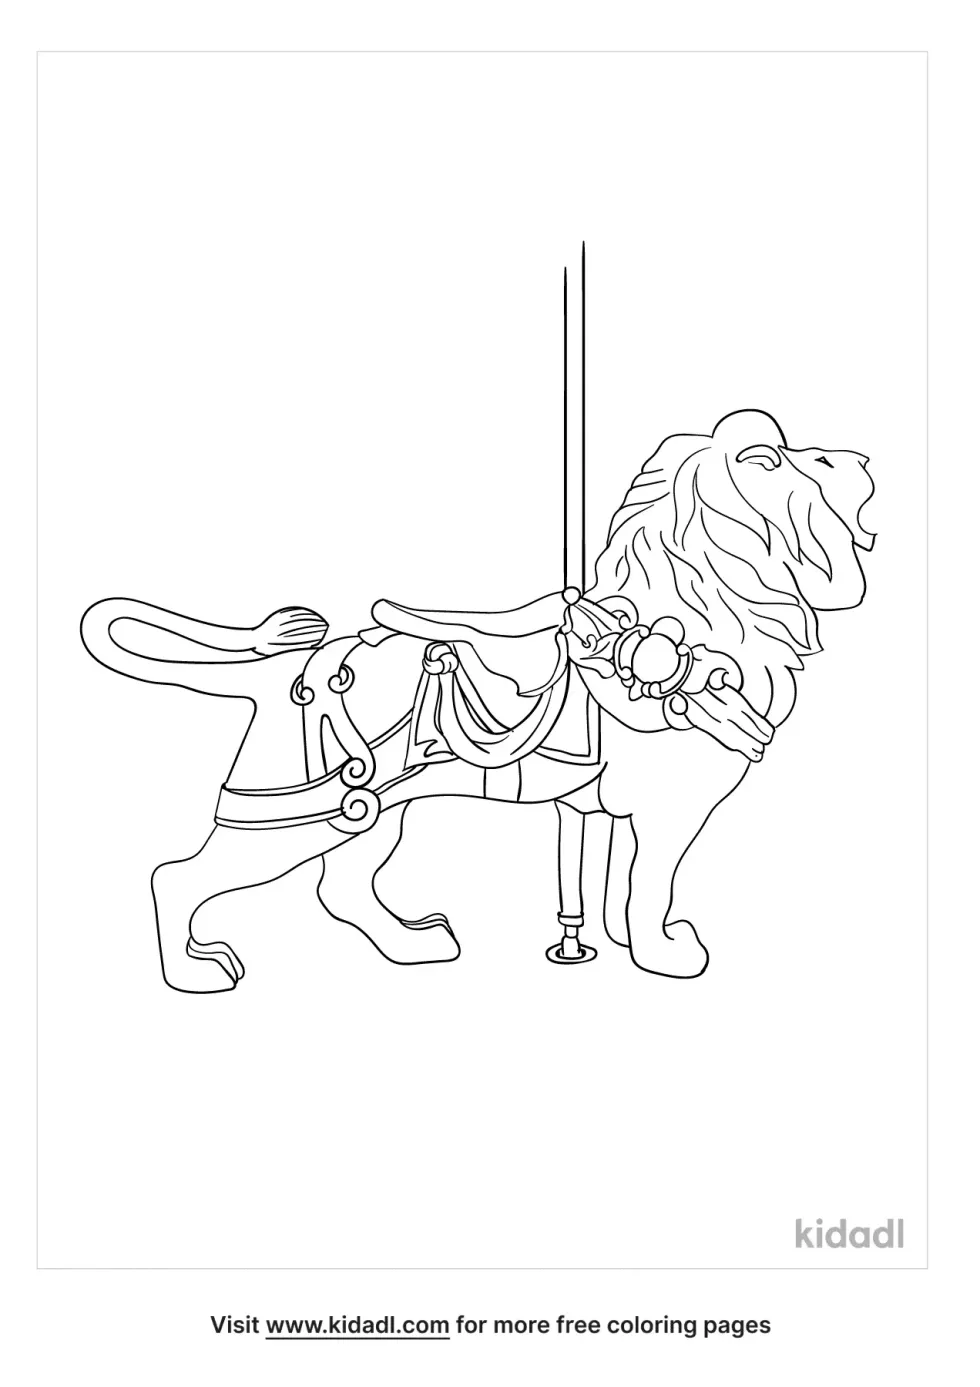 Lioncarousel Coloring Page